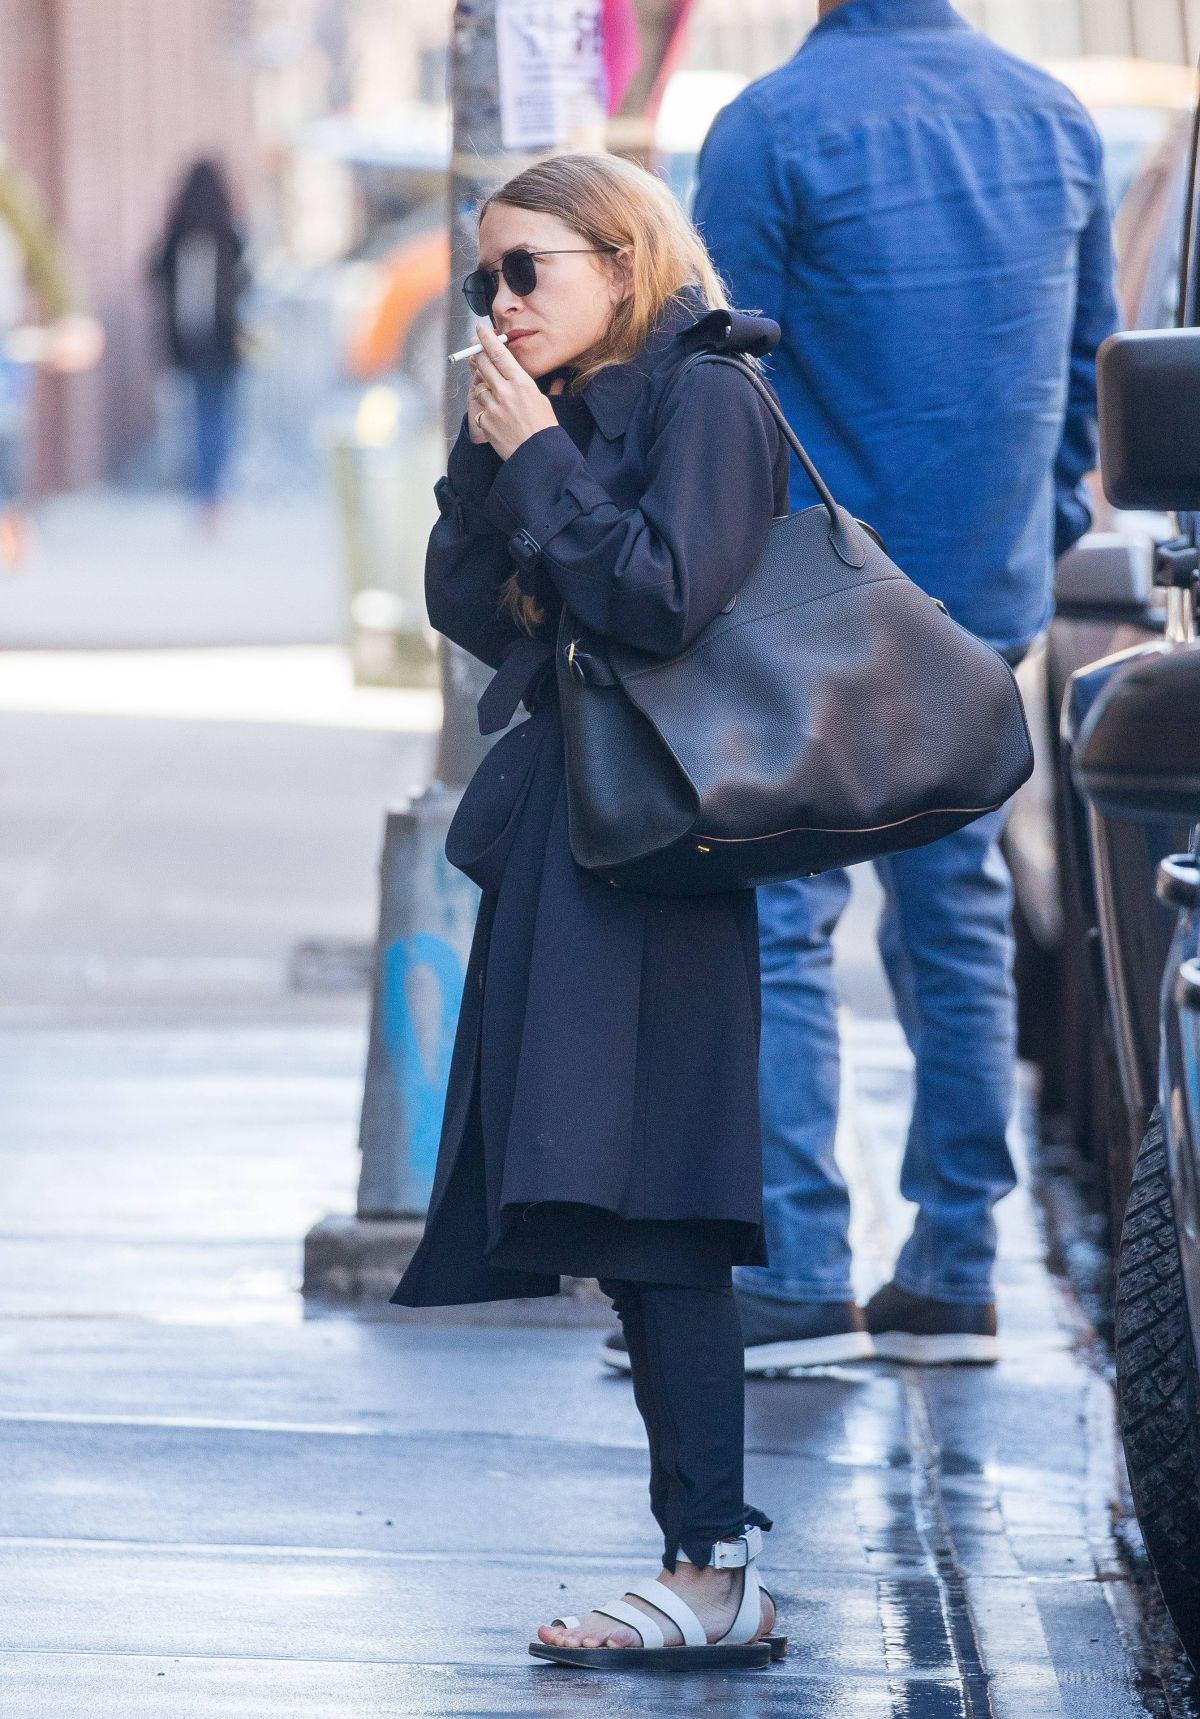 MARY KATE OLSEN Arrives at Her Office in New York 04/26/2018 – HawtCelebs